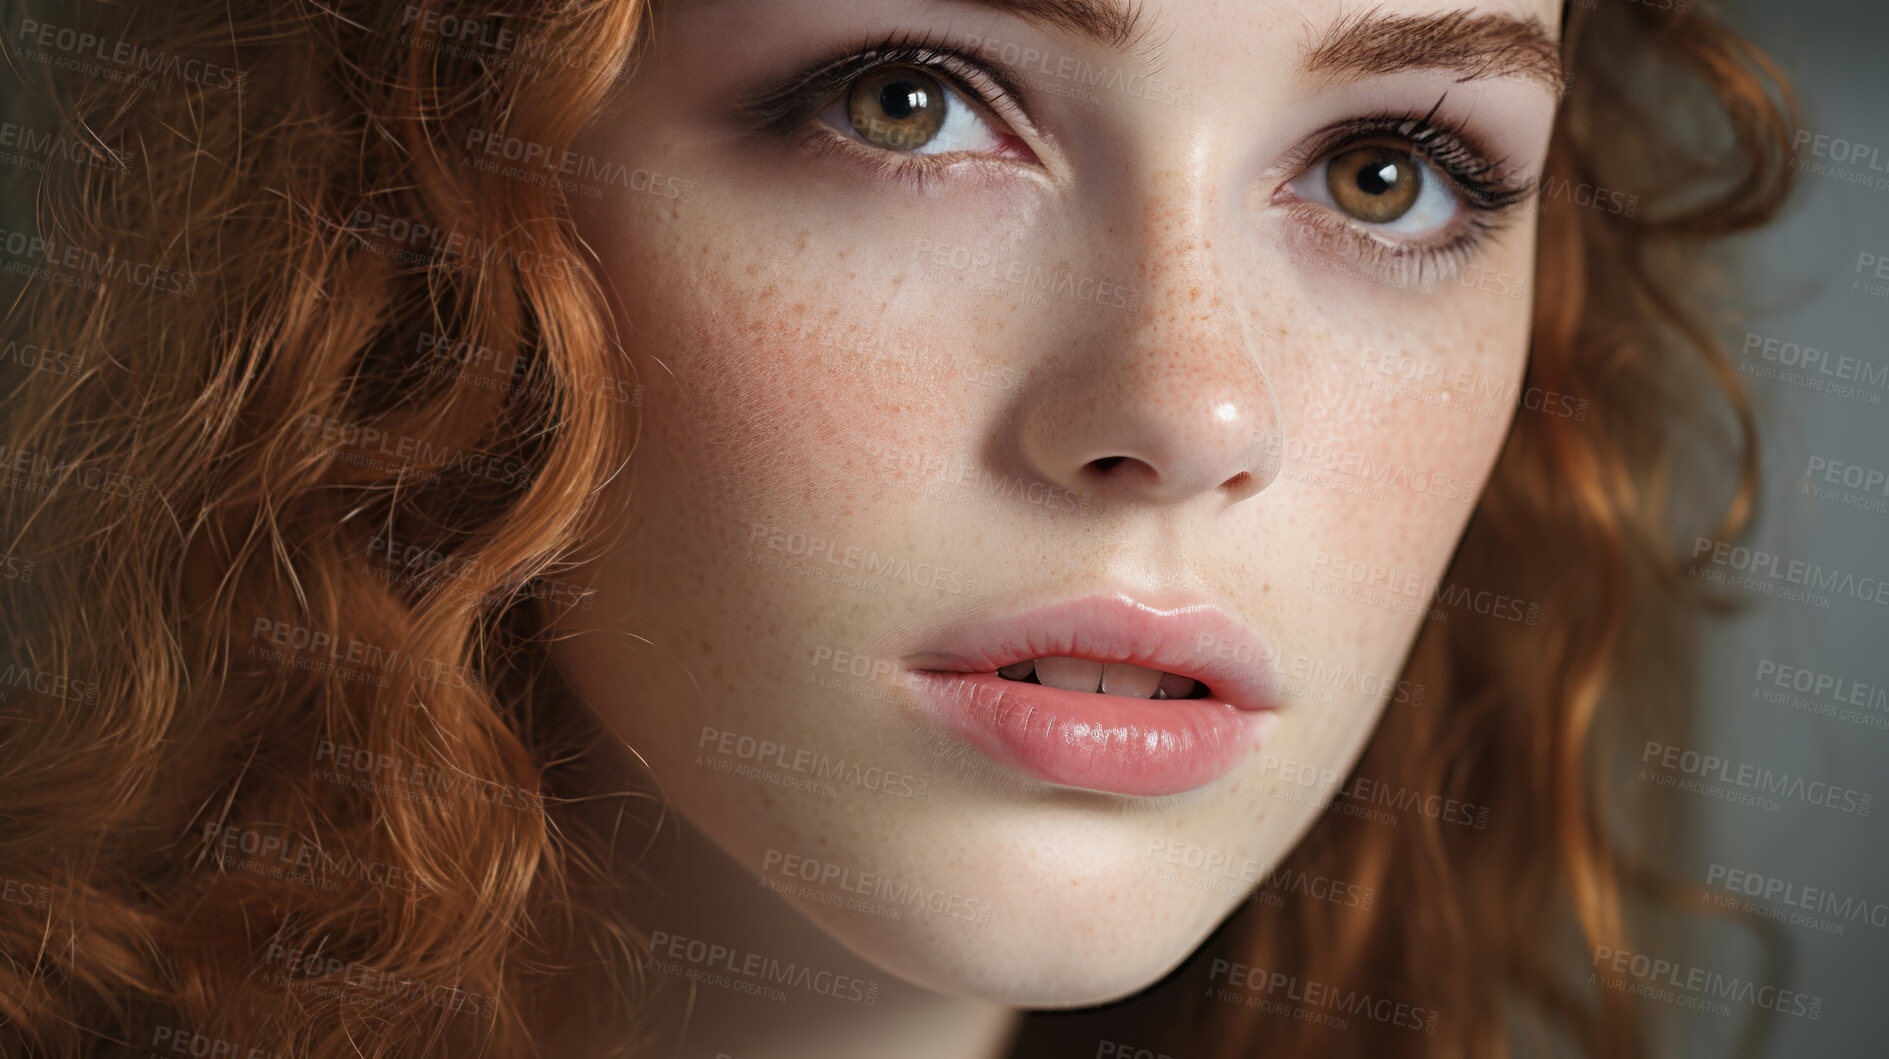 Buy stock photo Close-up of model. Make-up, freckle skin. Natural light. Fashion, editorial concept.